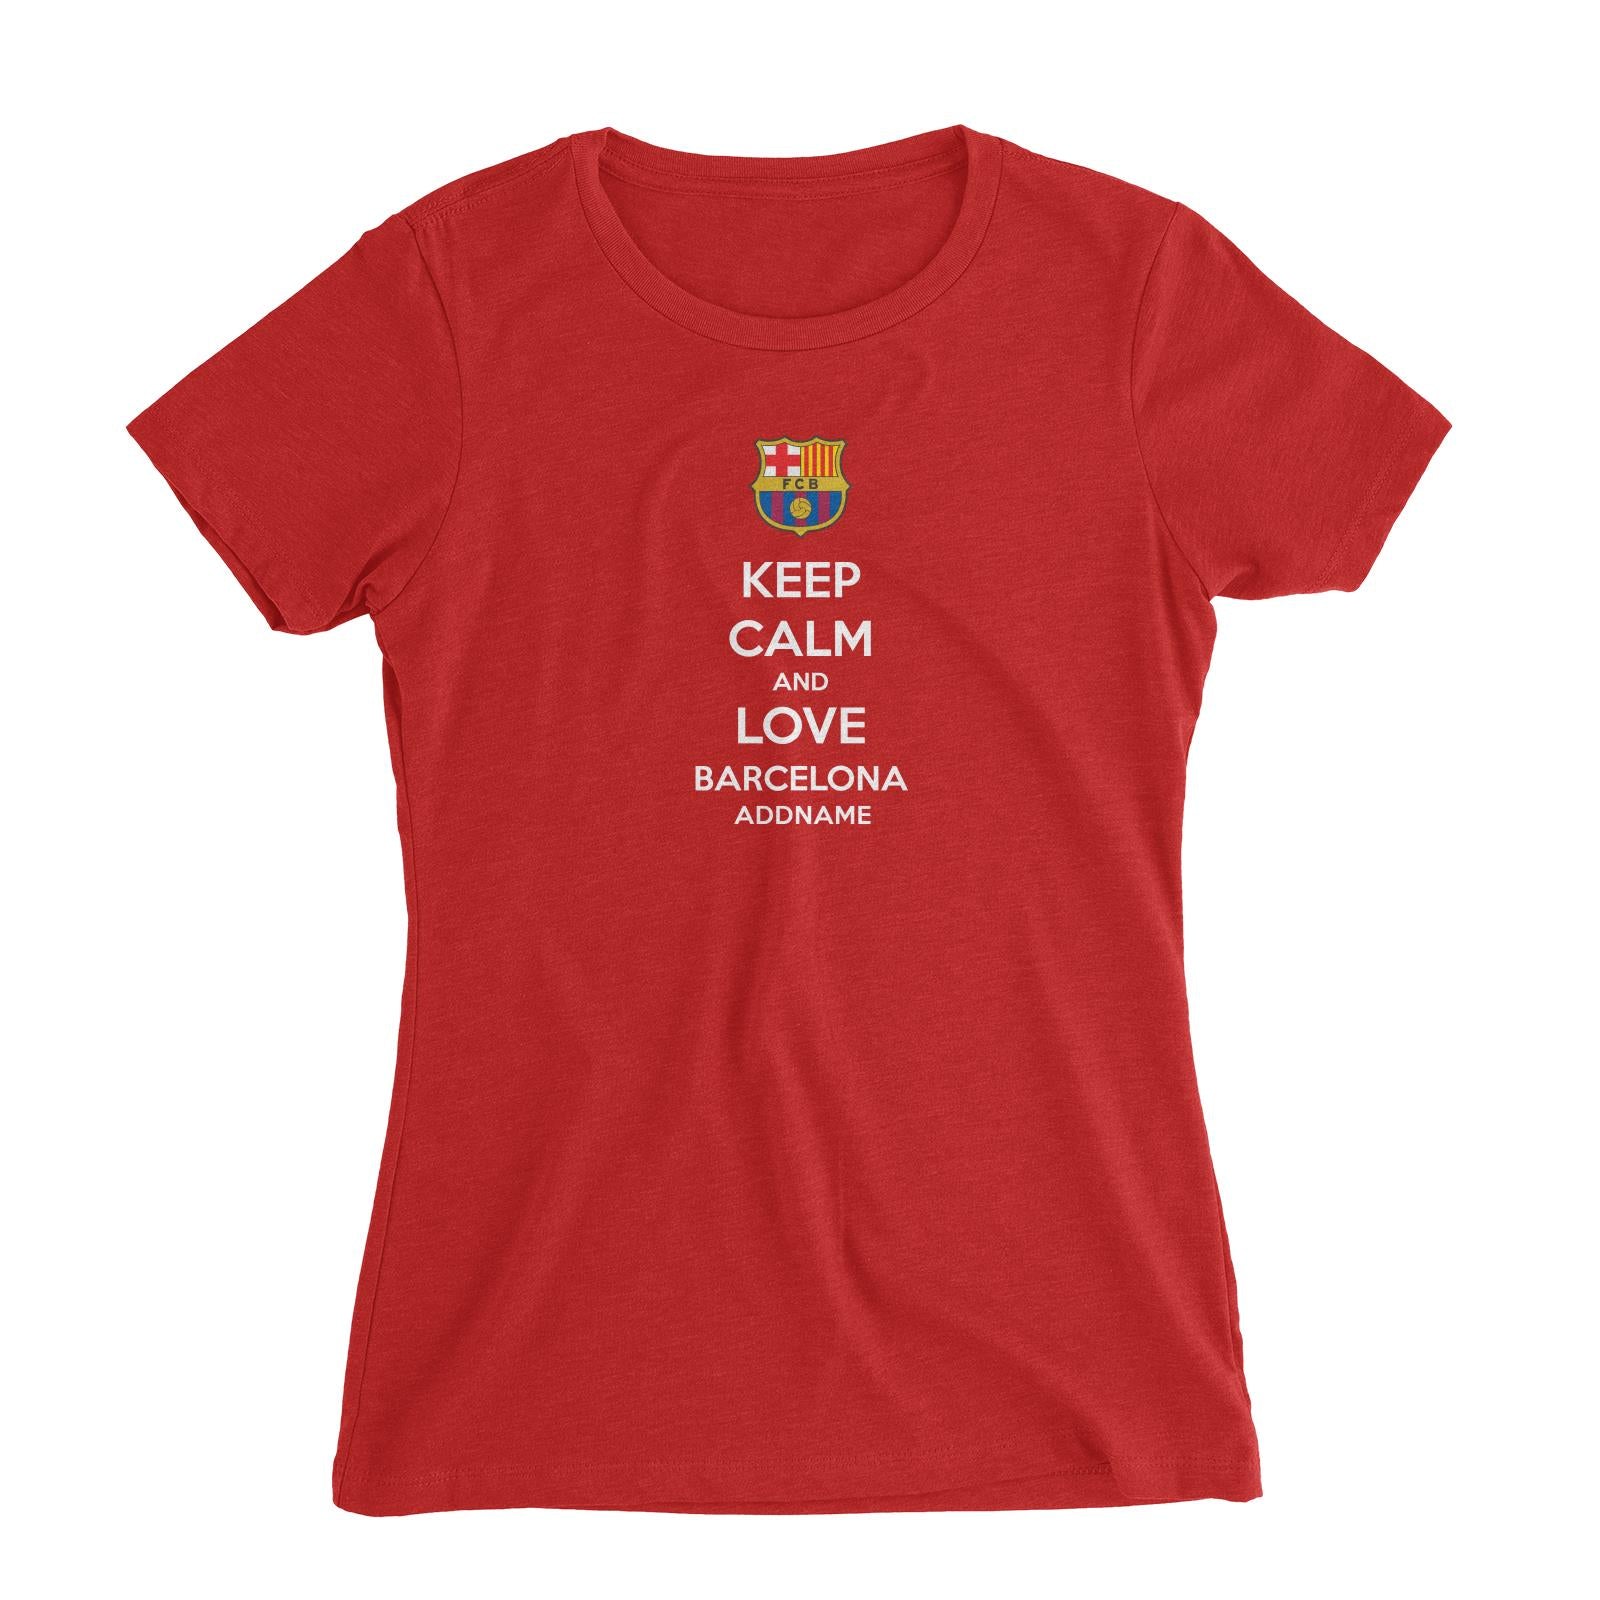 Barcelona Football Keep Calm And Love Series Addname Women Slim Fit T-Shirt